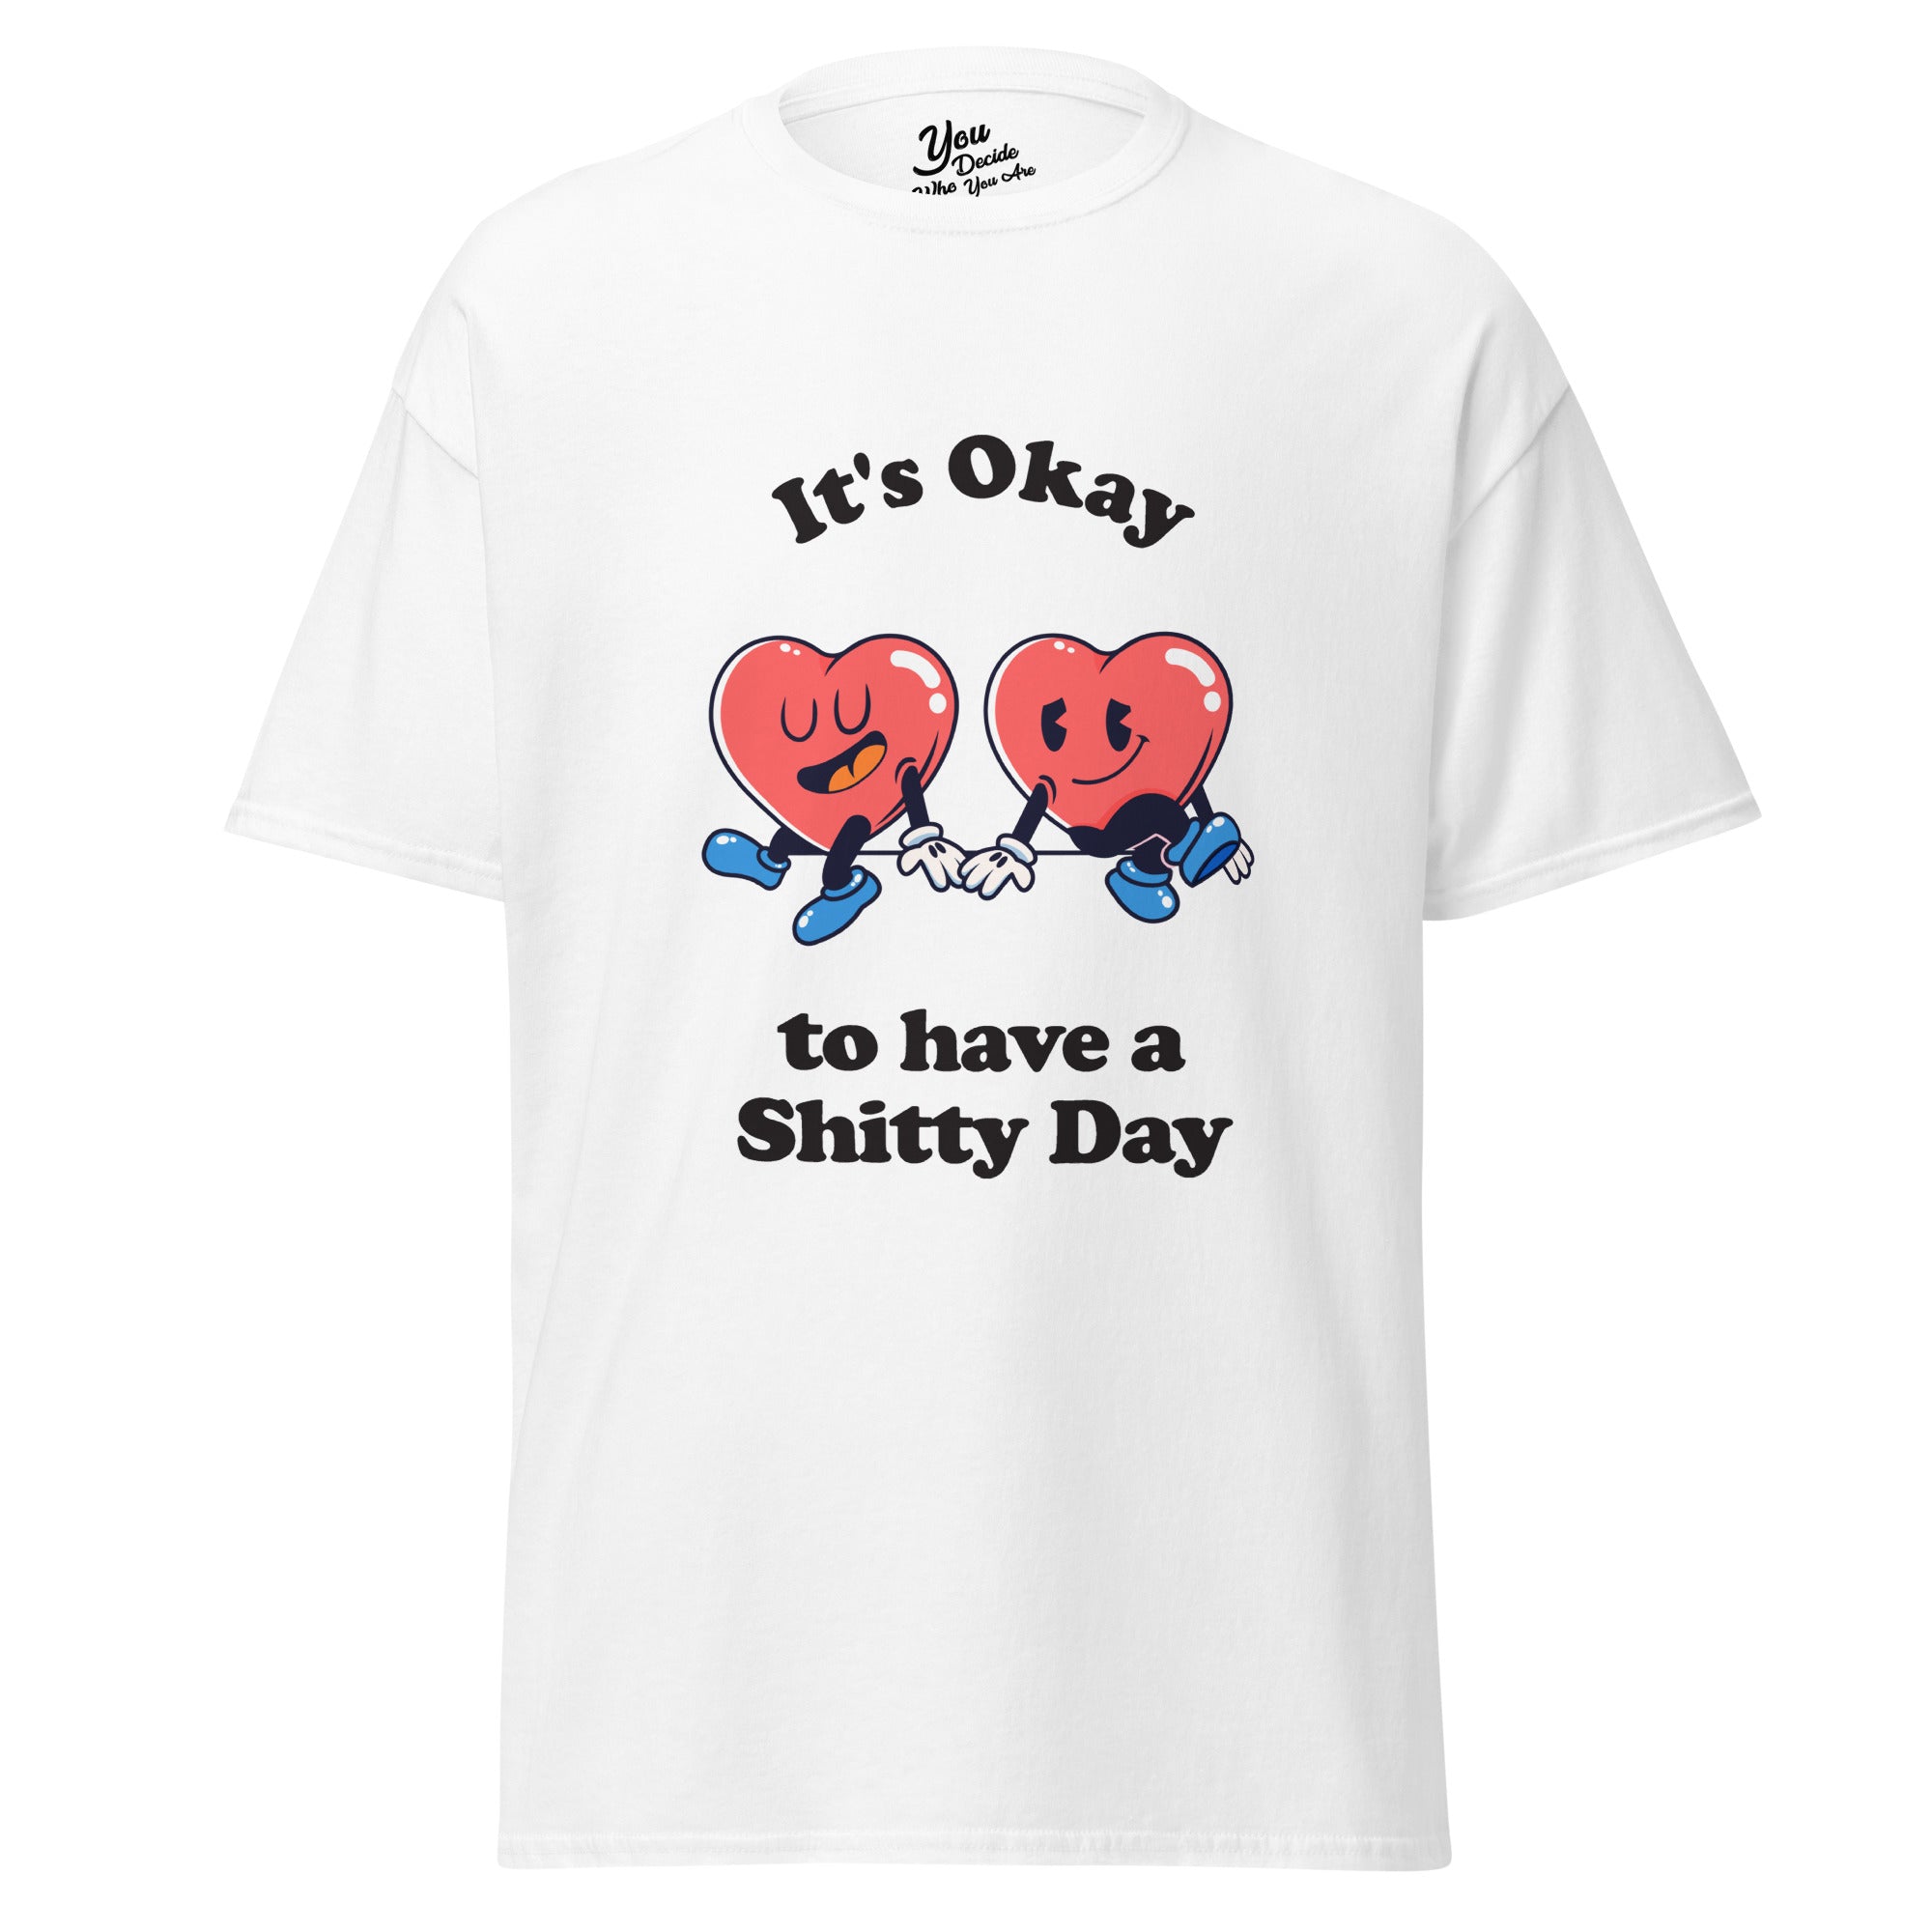 It's Okay to have a Shitty Day T-Shirt